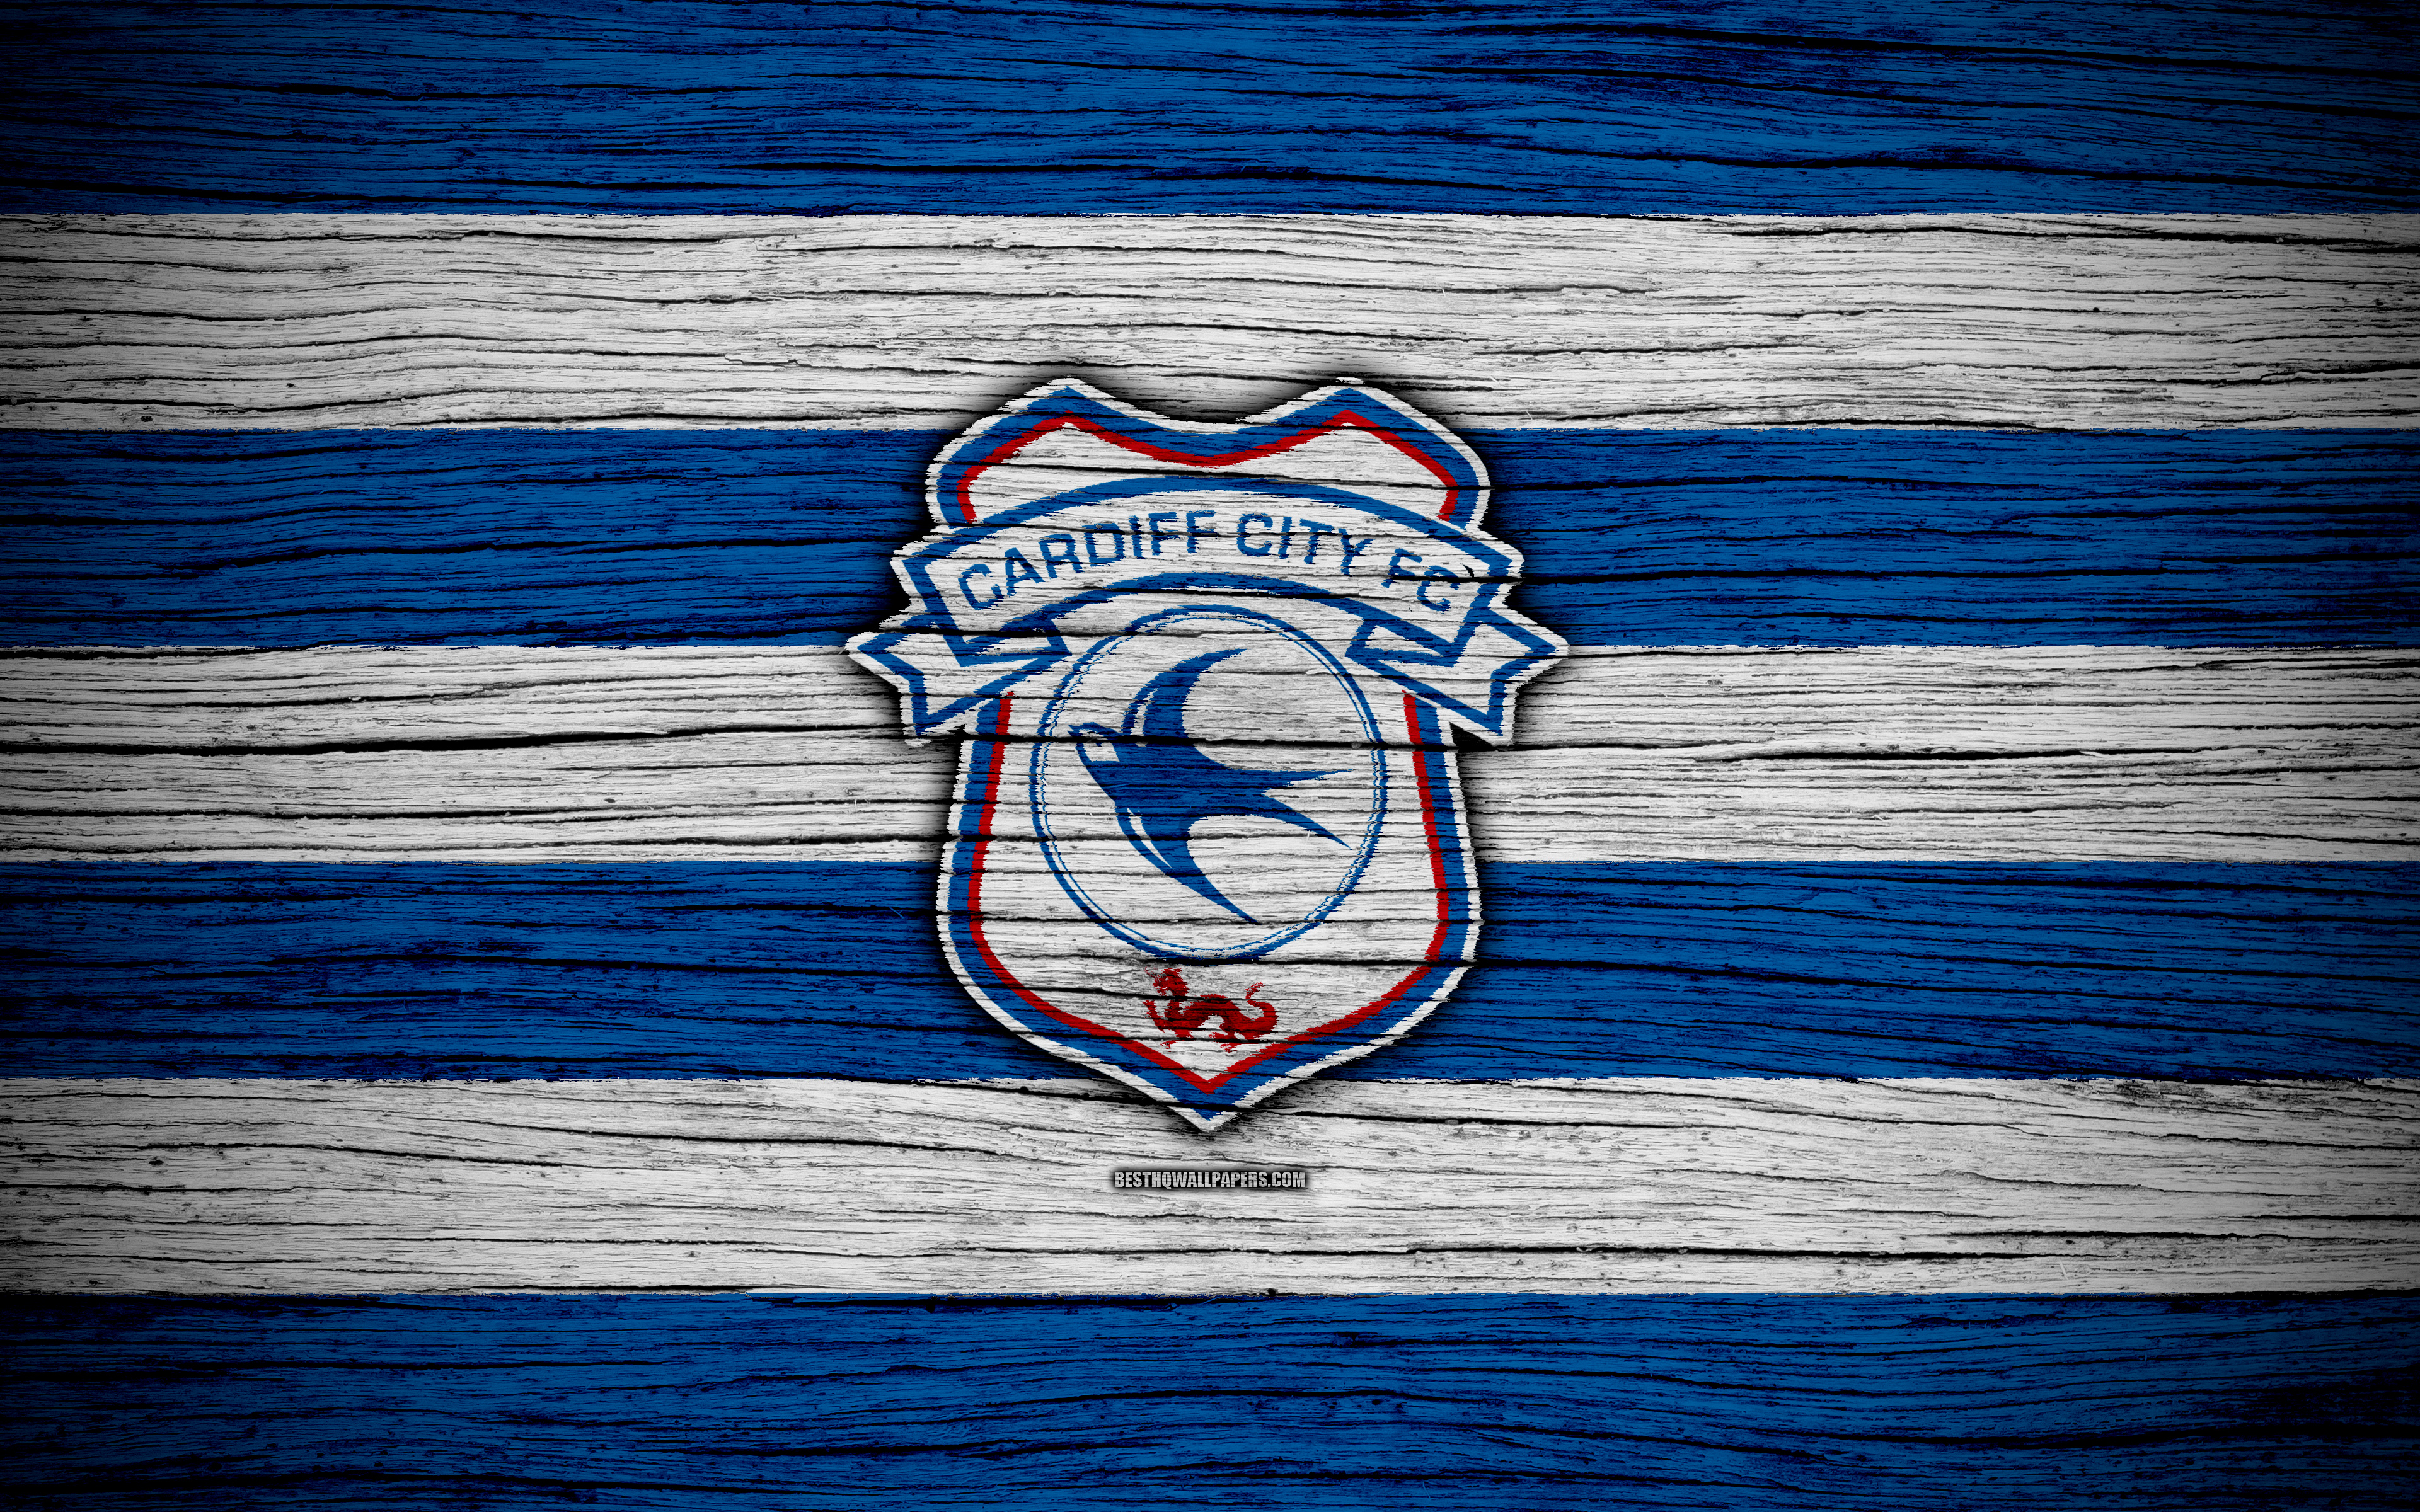 Cardiff City F.C. Wallpapers